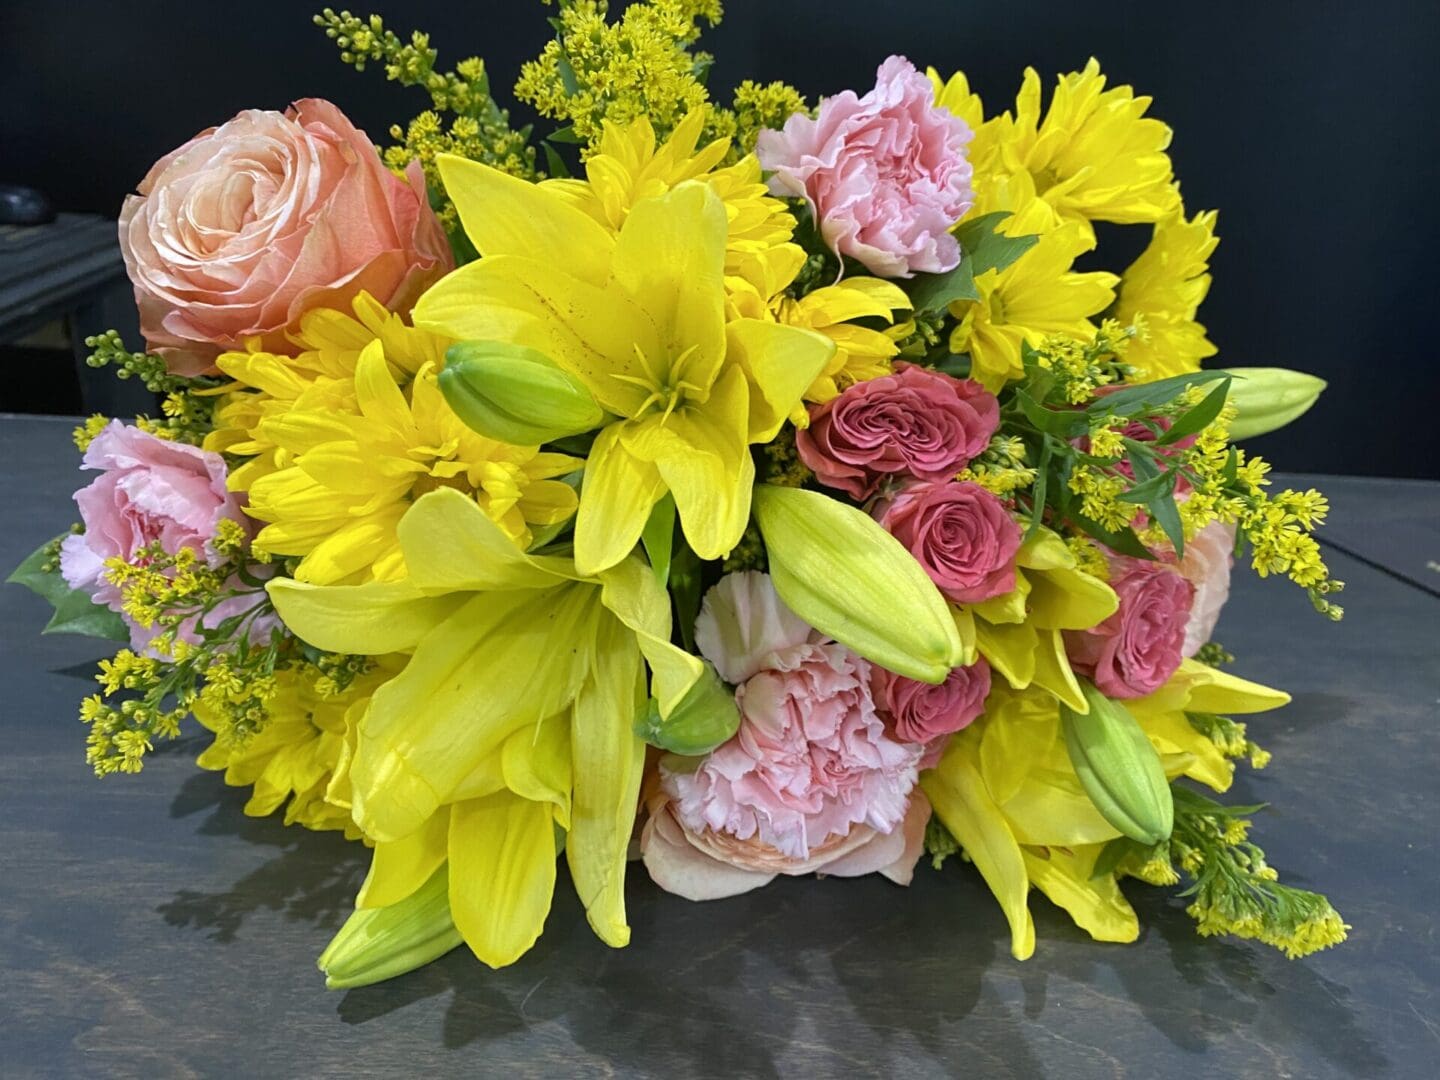 A bouquet of pink and yellow flowers